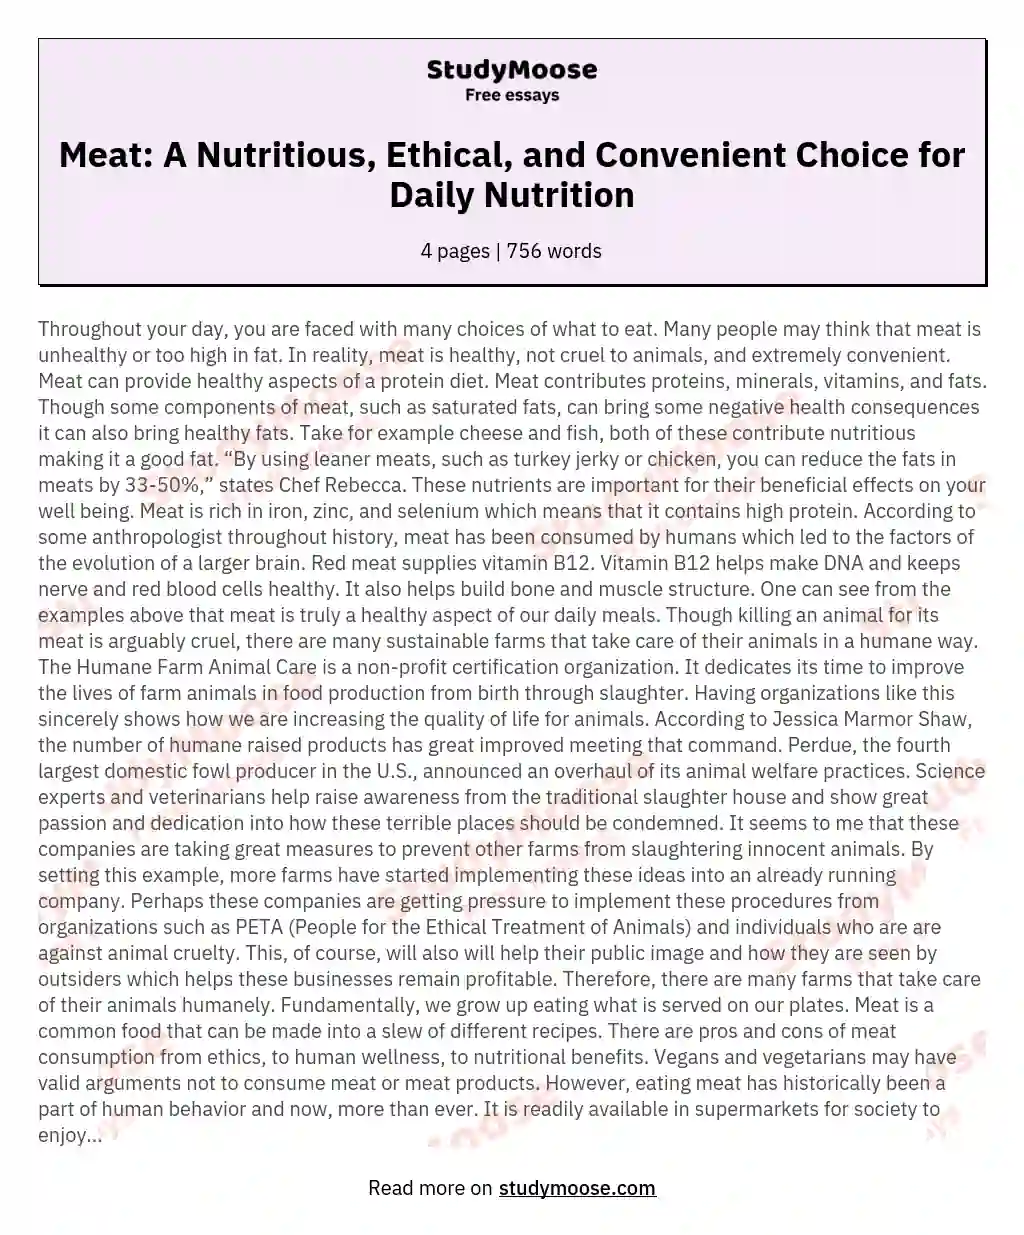 Meat: A Nutritious, Ethical, and Convenient Choice for Daily Nutrition essay